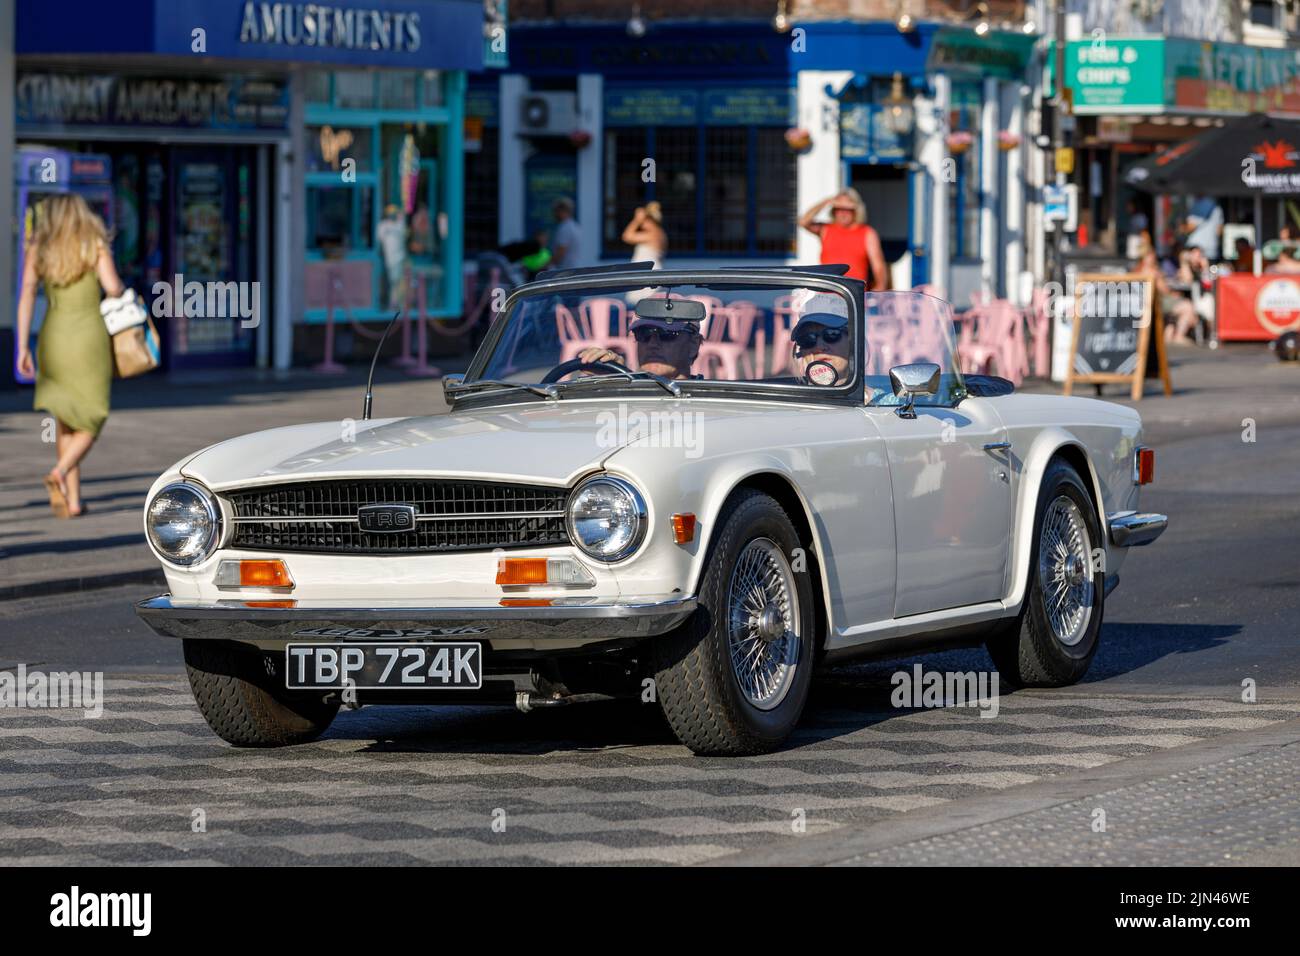 A white Triumph TR6 convertible with hood down being driven along Marine Parade on the English seaside in Essex during the heatwave of 2022 Stock Photo